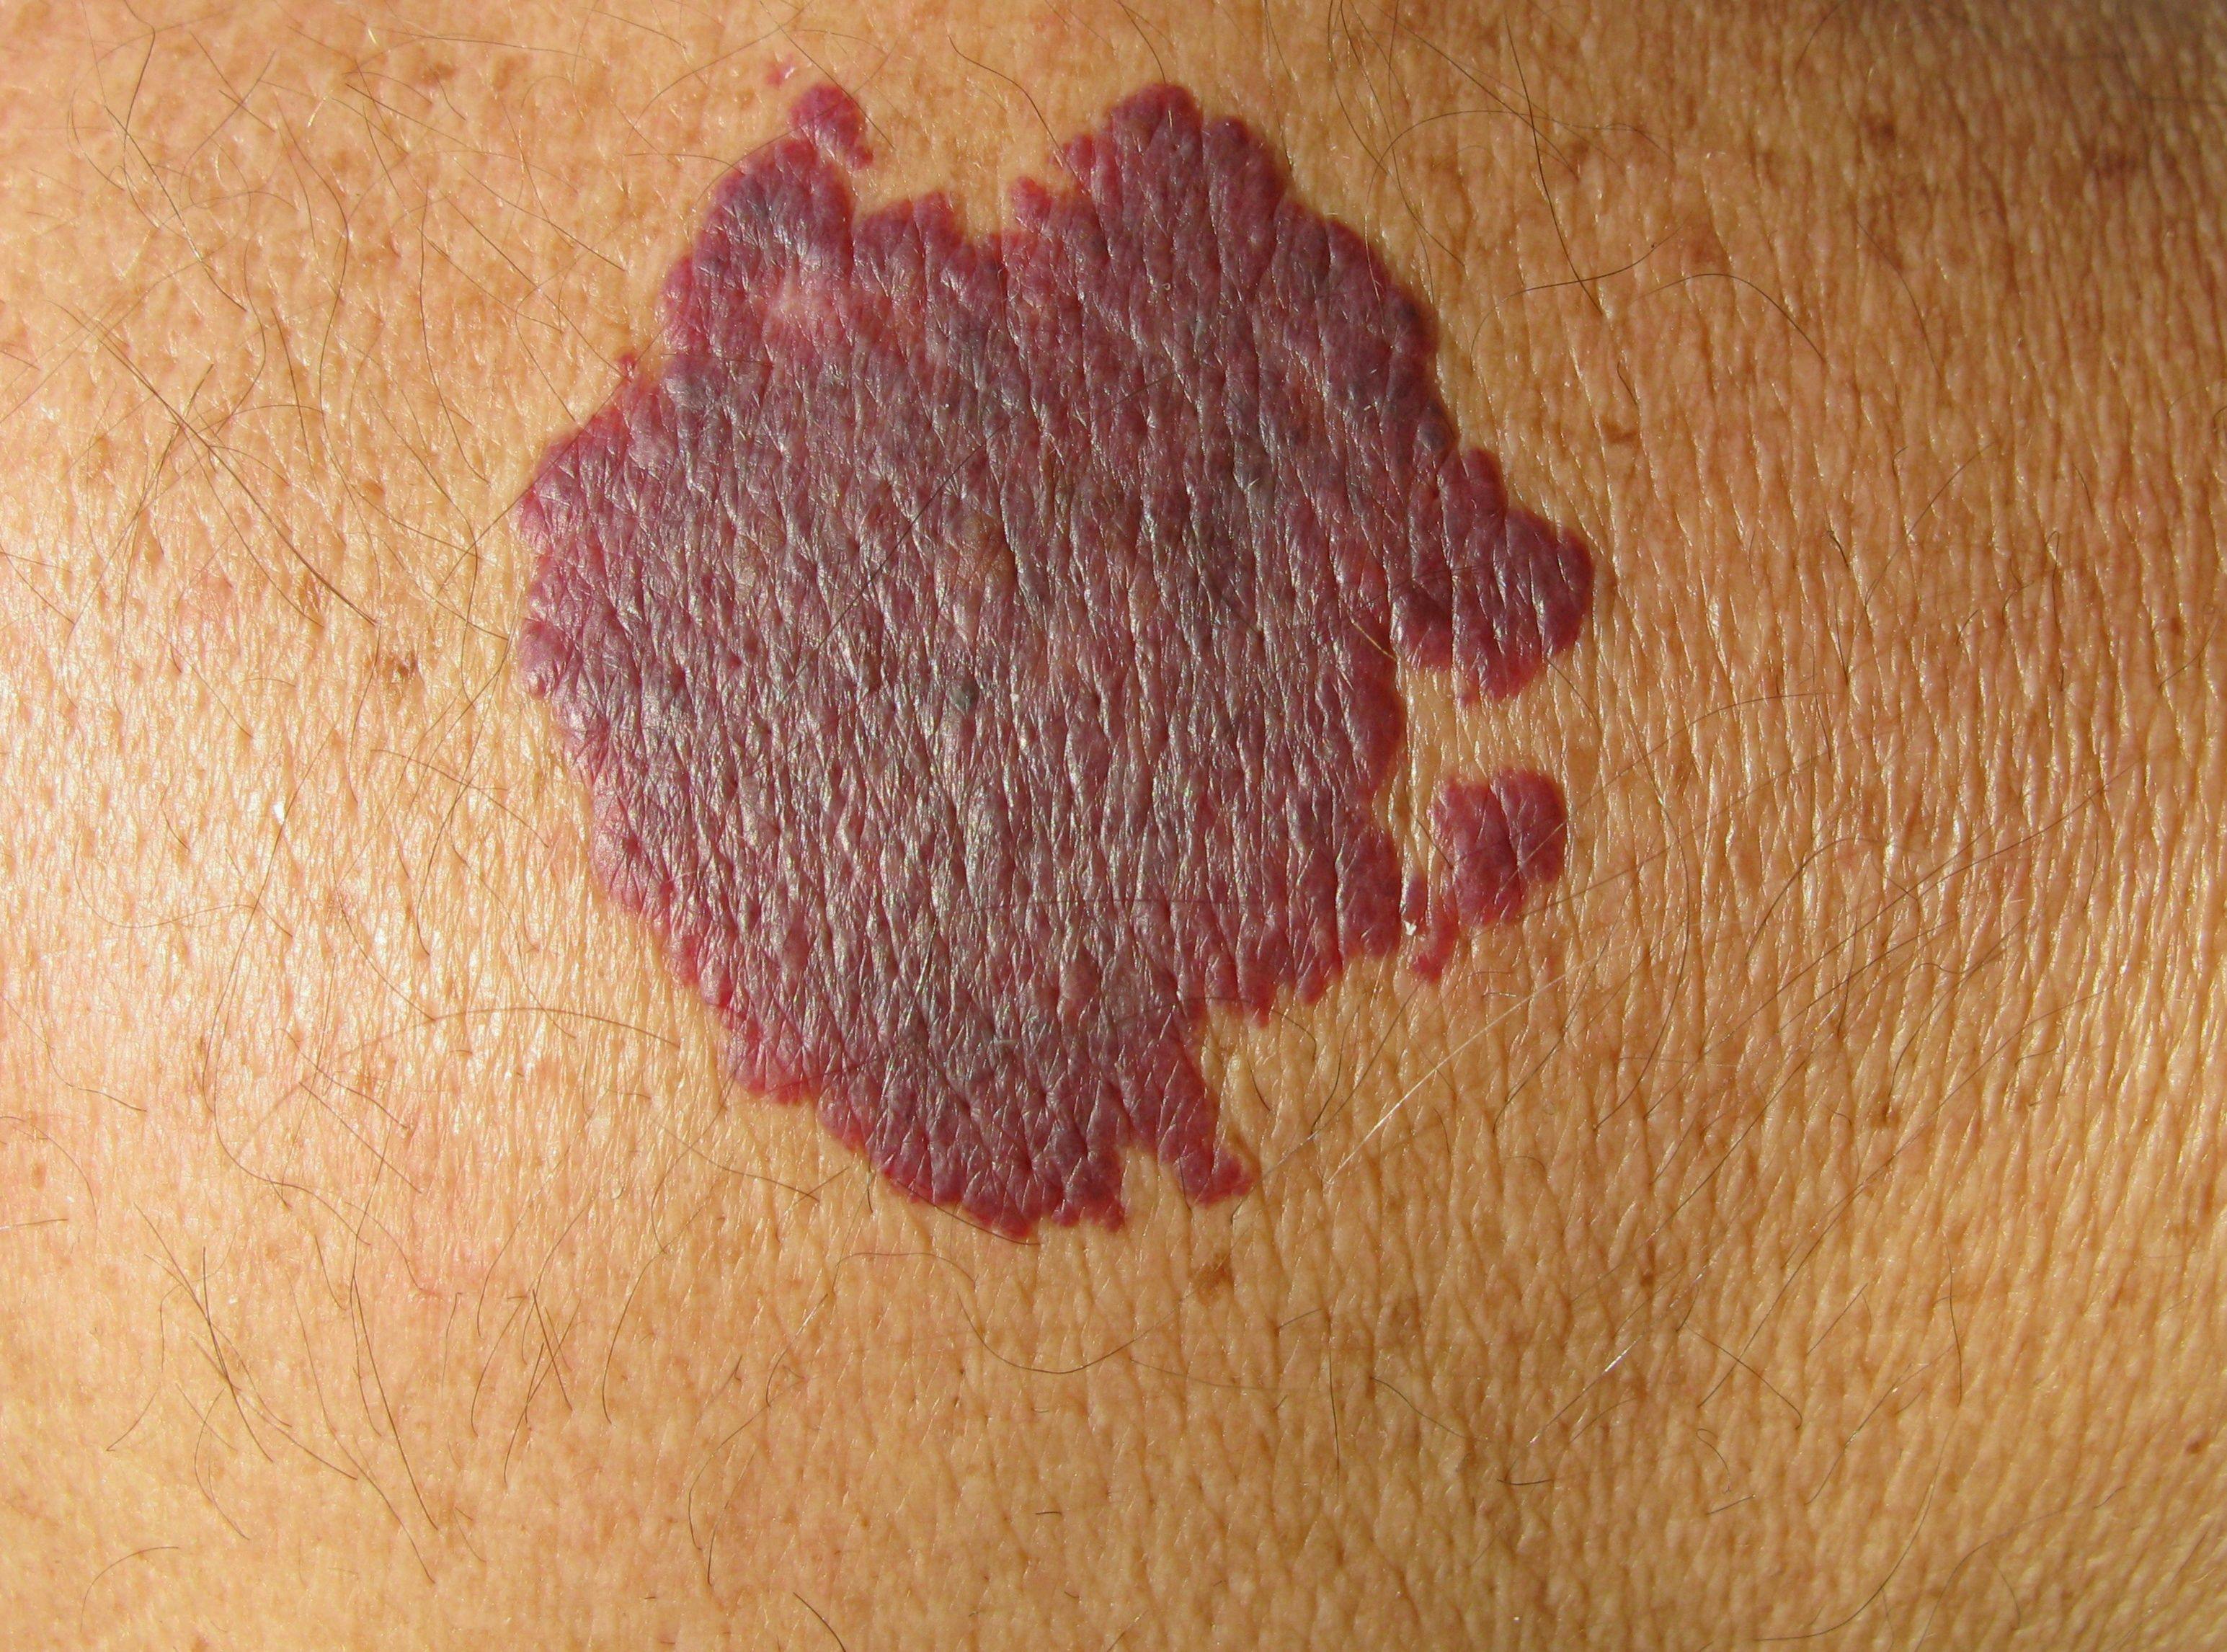 Weekly PDL treatments associated with improved port-wine birthmark therapeutic outcomes in infants | Image Credit: © guentermanaus - © guentermanaus - stock.adobe.com.